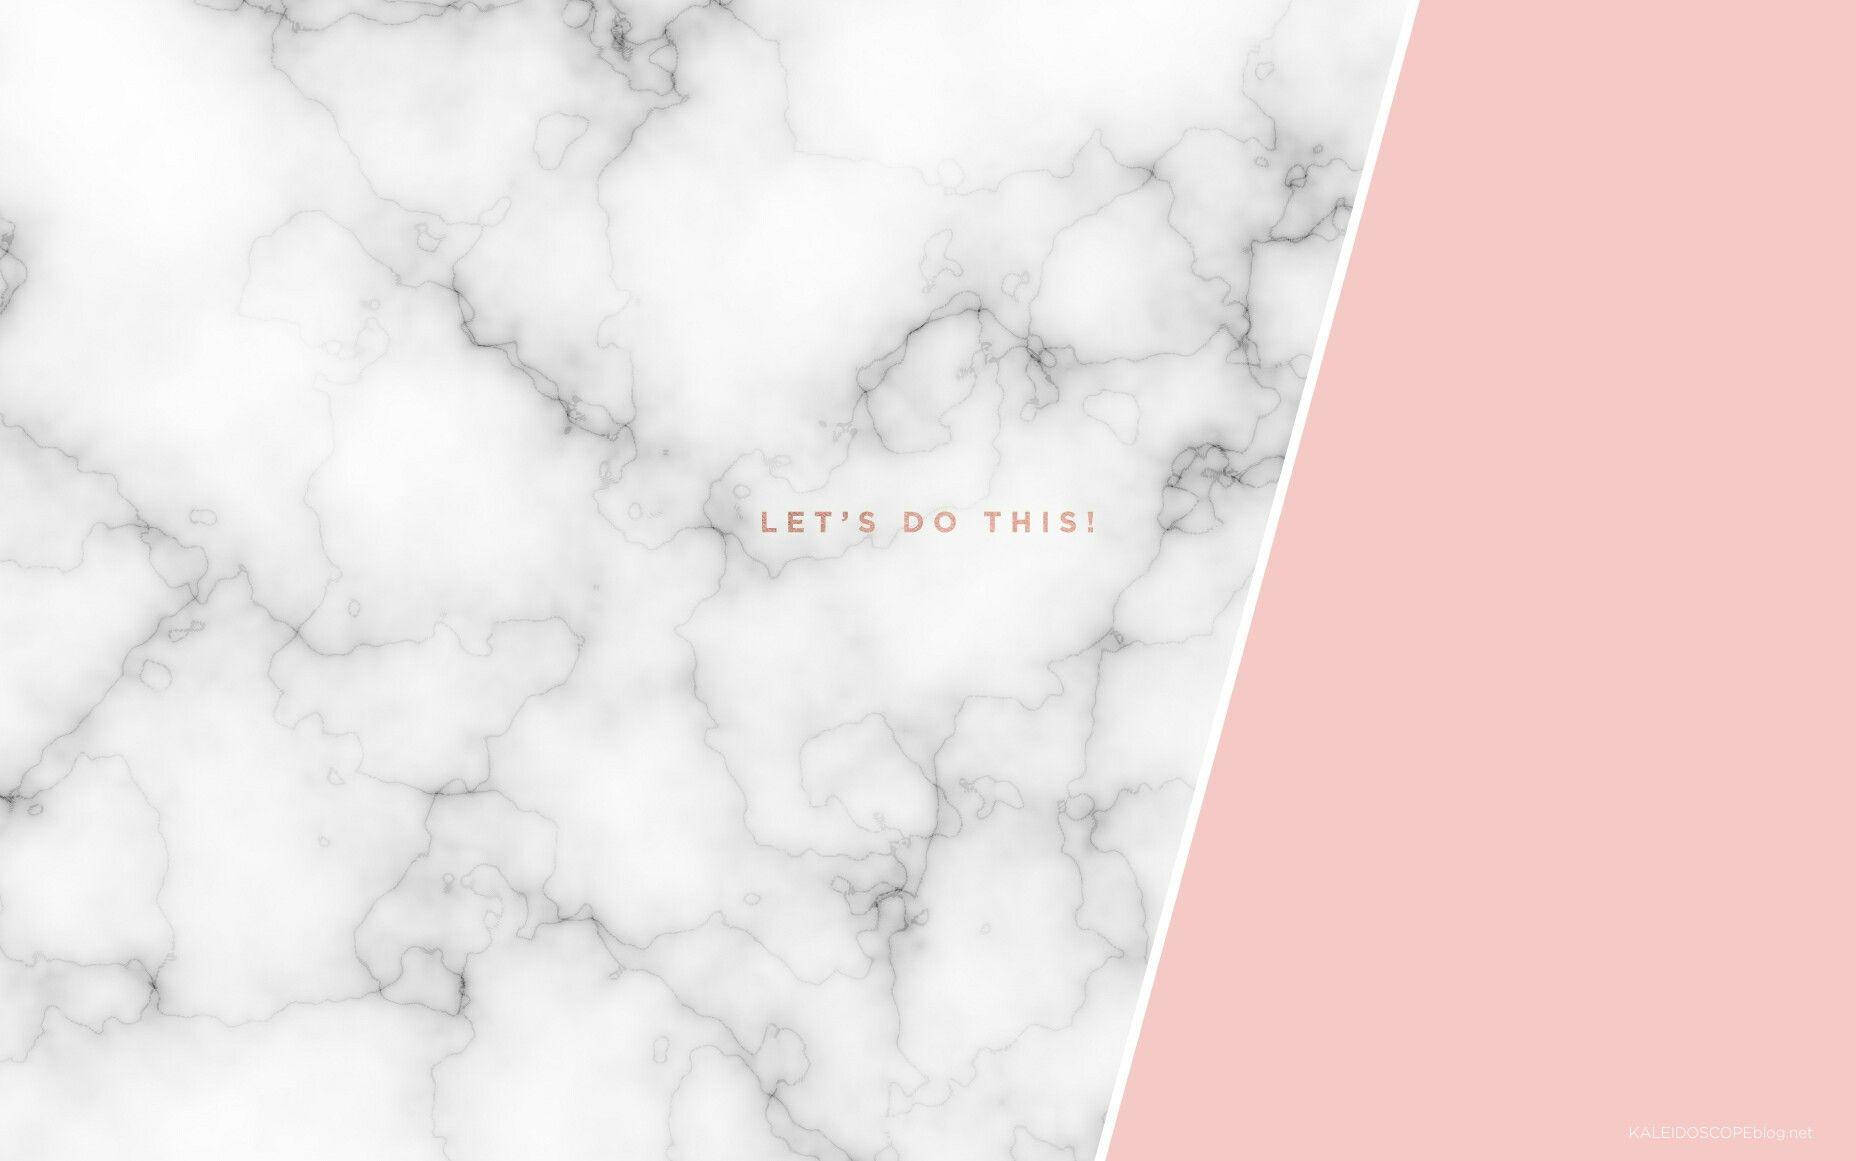 White Aesthetic Tumblr Marble Pink Let's Do This